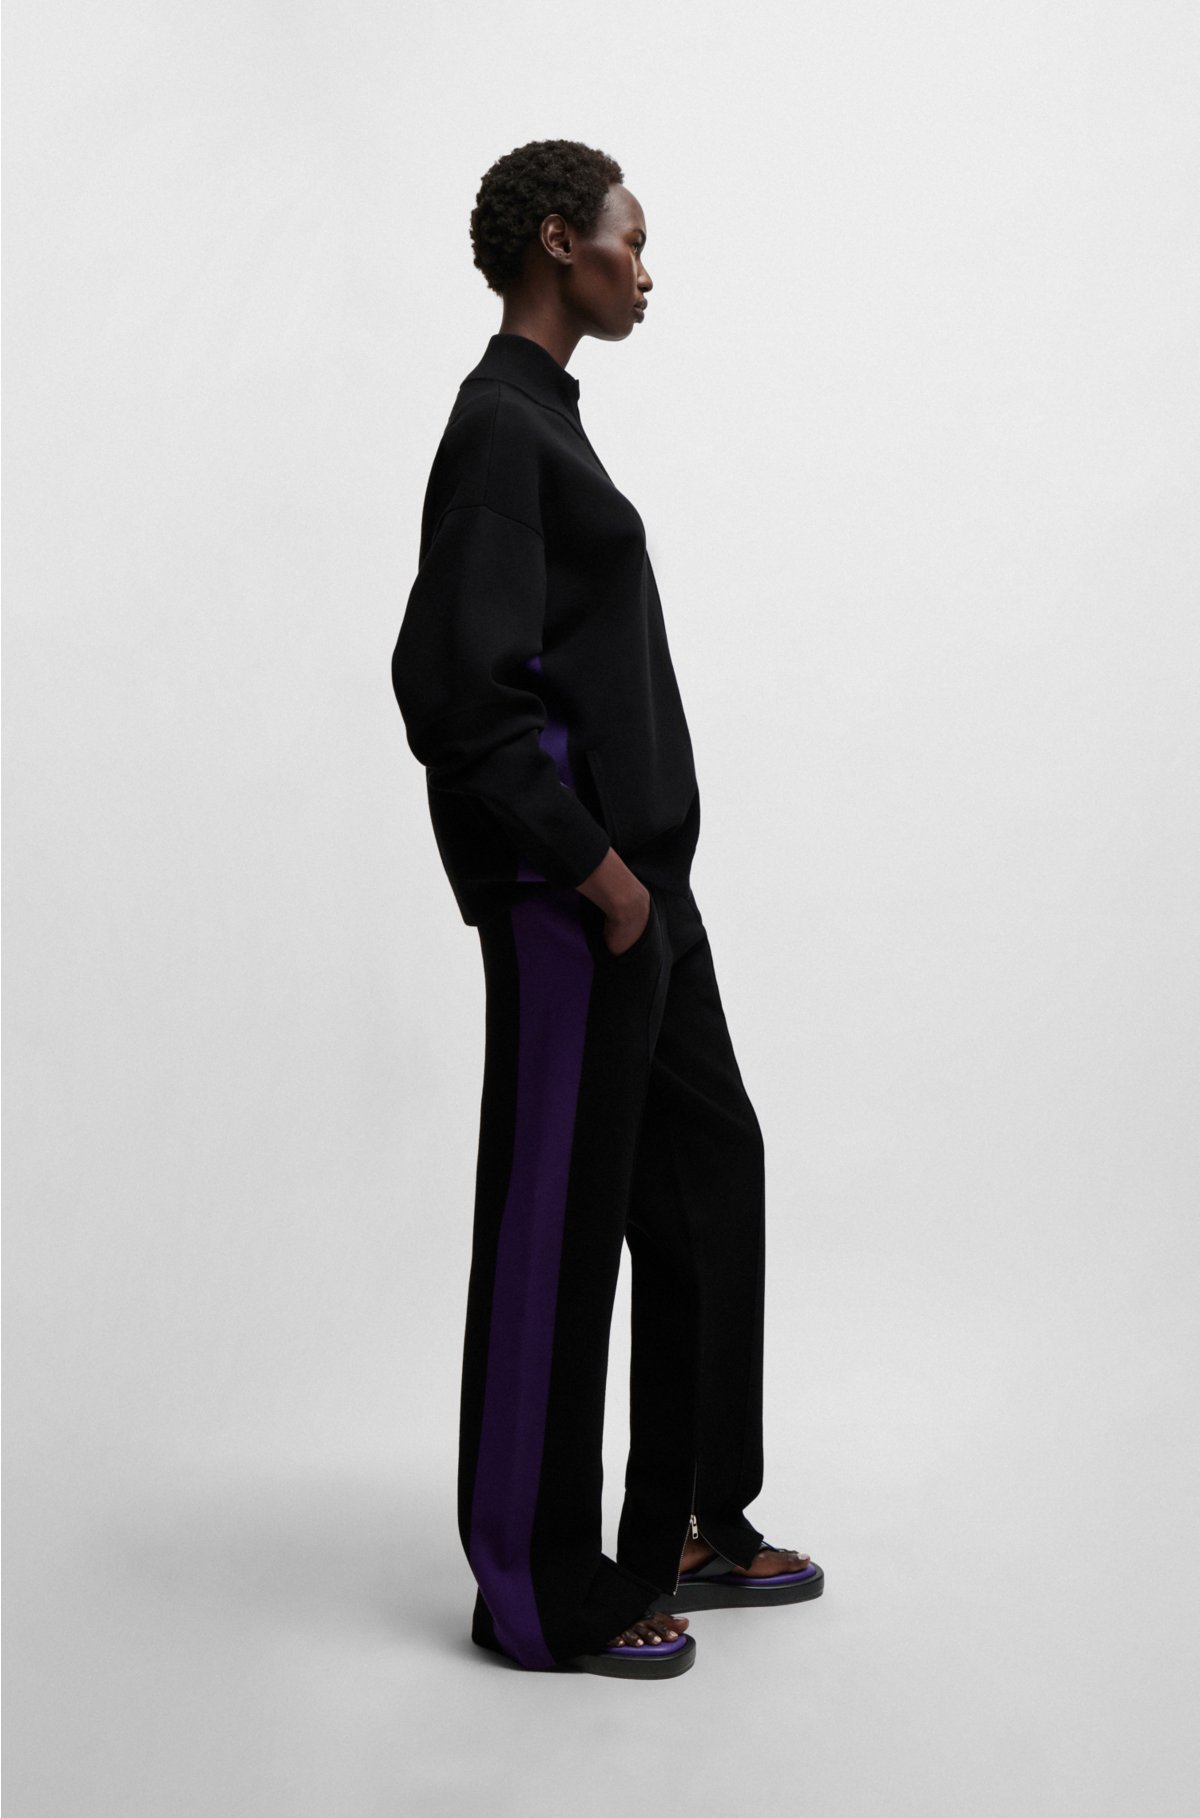 NAOMI x BOSS knitted trousers with contrast side stripe, Black